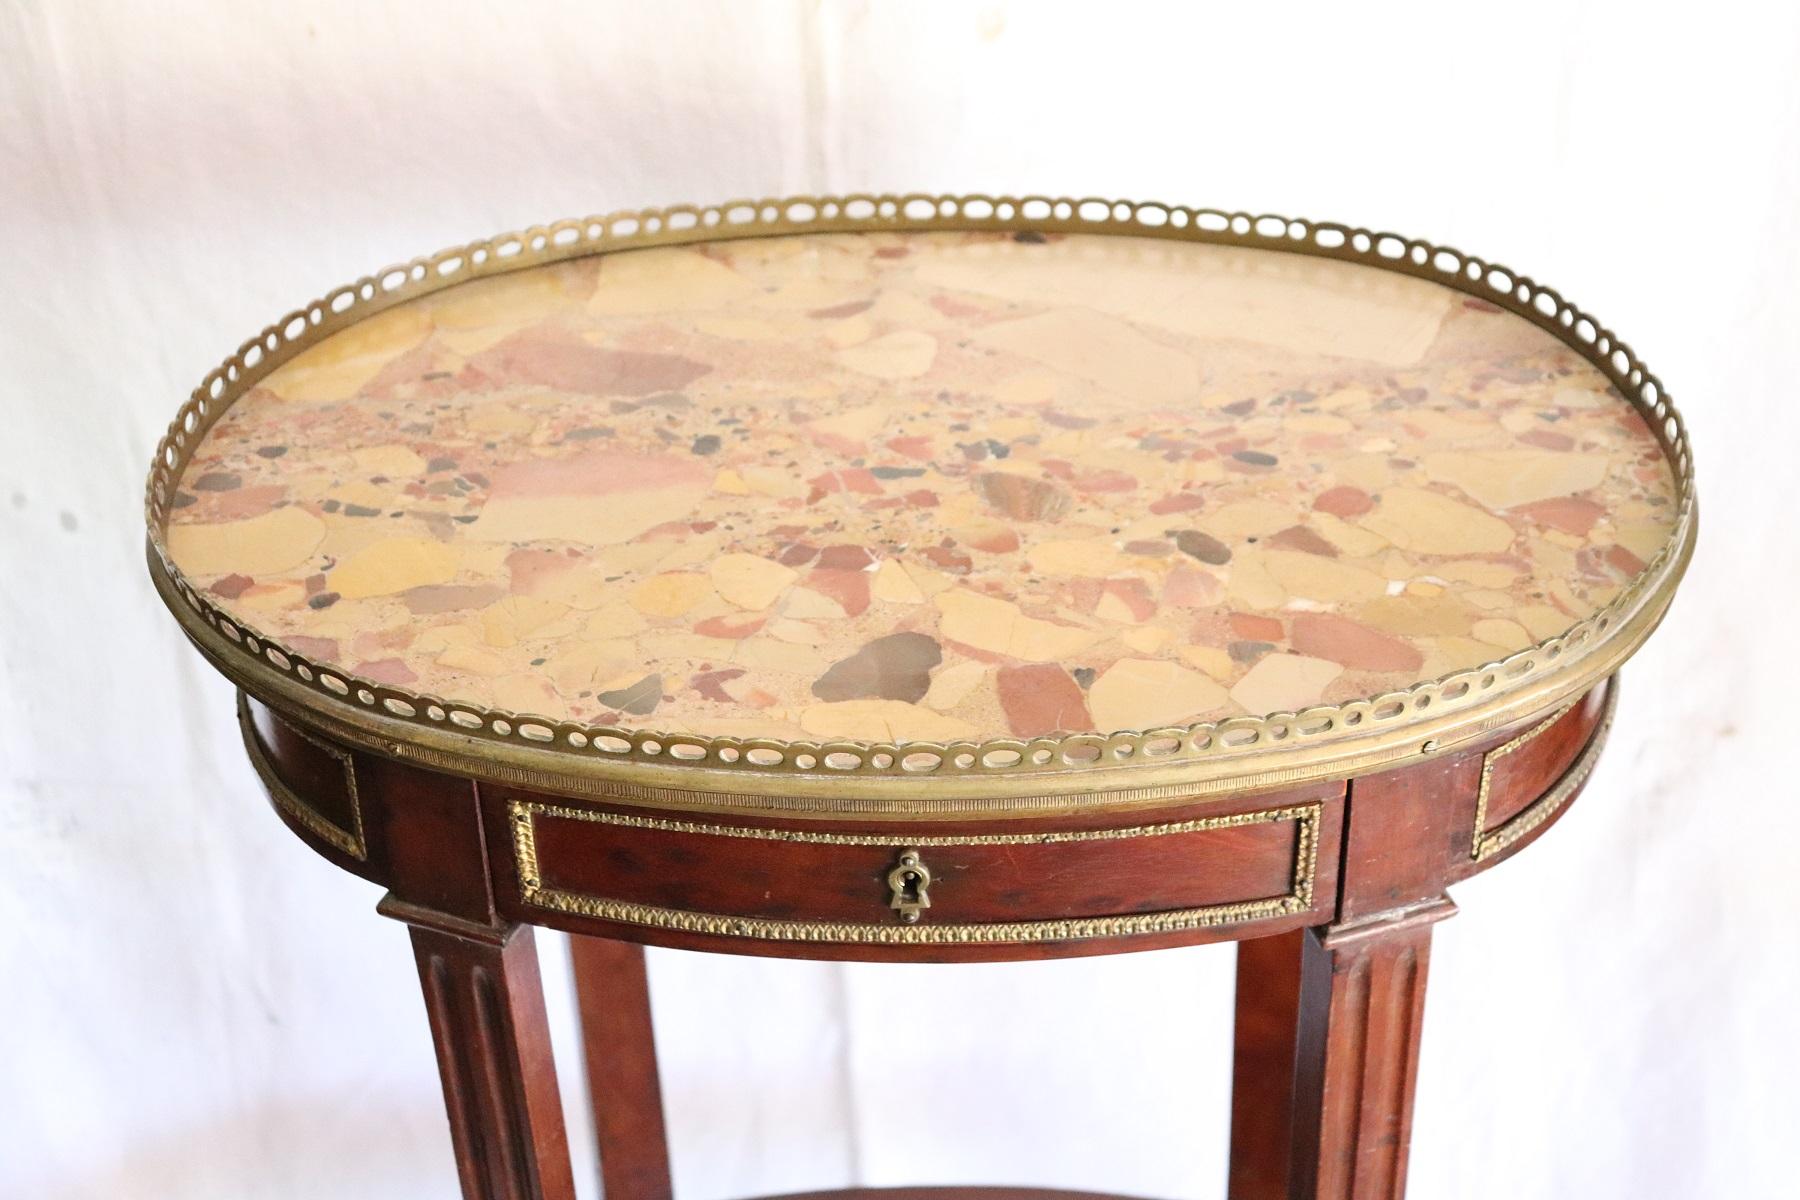 Rare and fine quality Napoleon III side table. The table has a particular legs slender. Precious mahogany wood with finely chiseled gilded bronze decorations. Fine marble top. On the front a small and practical drawer. The table is decorated on each